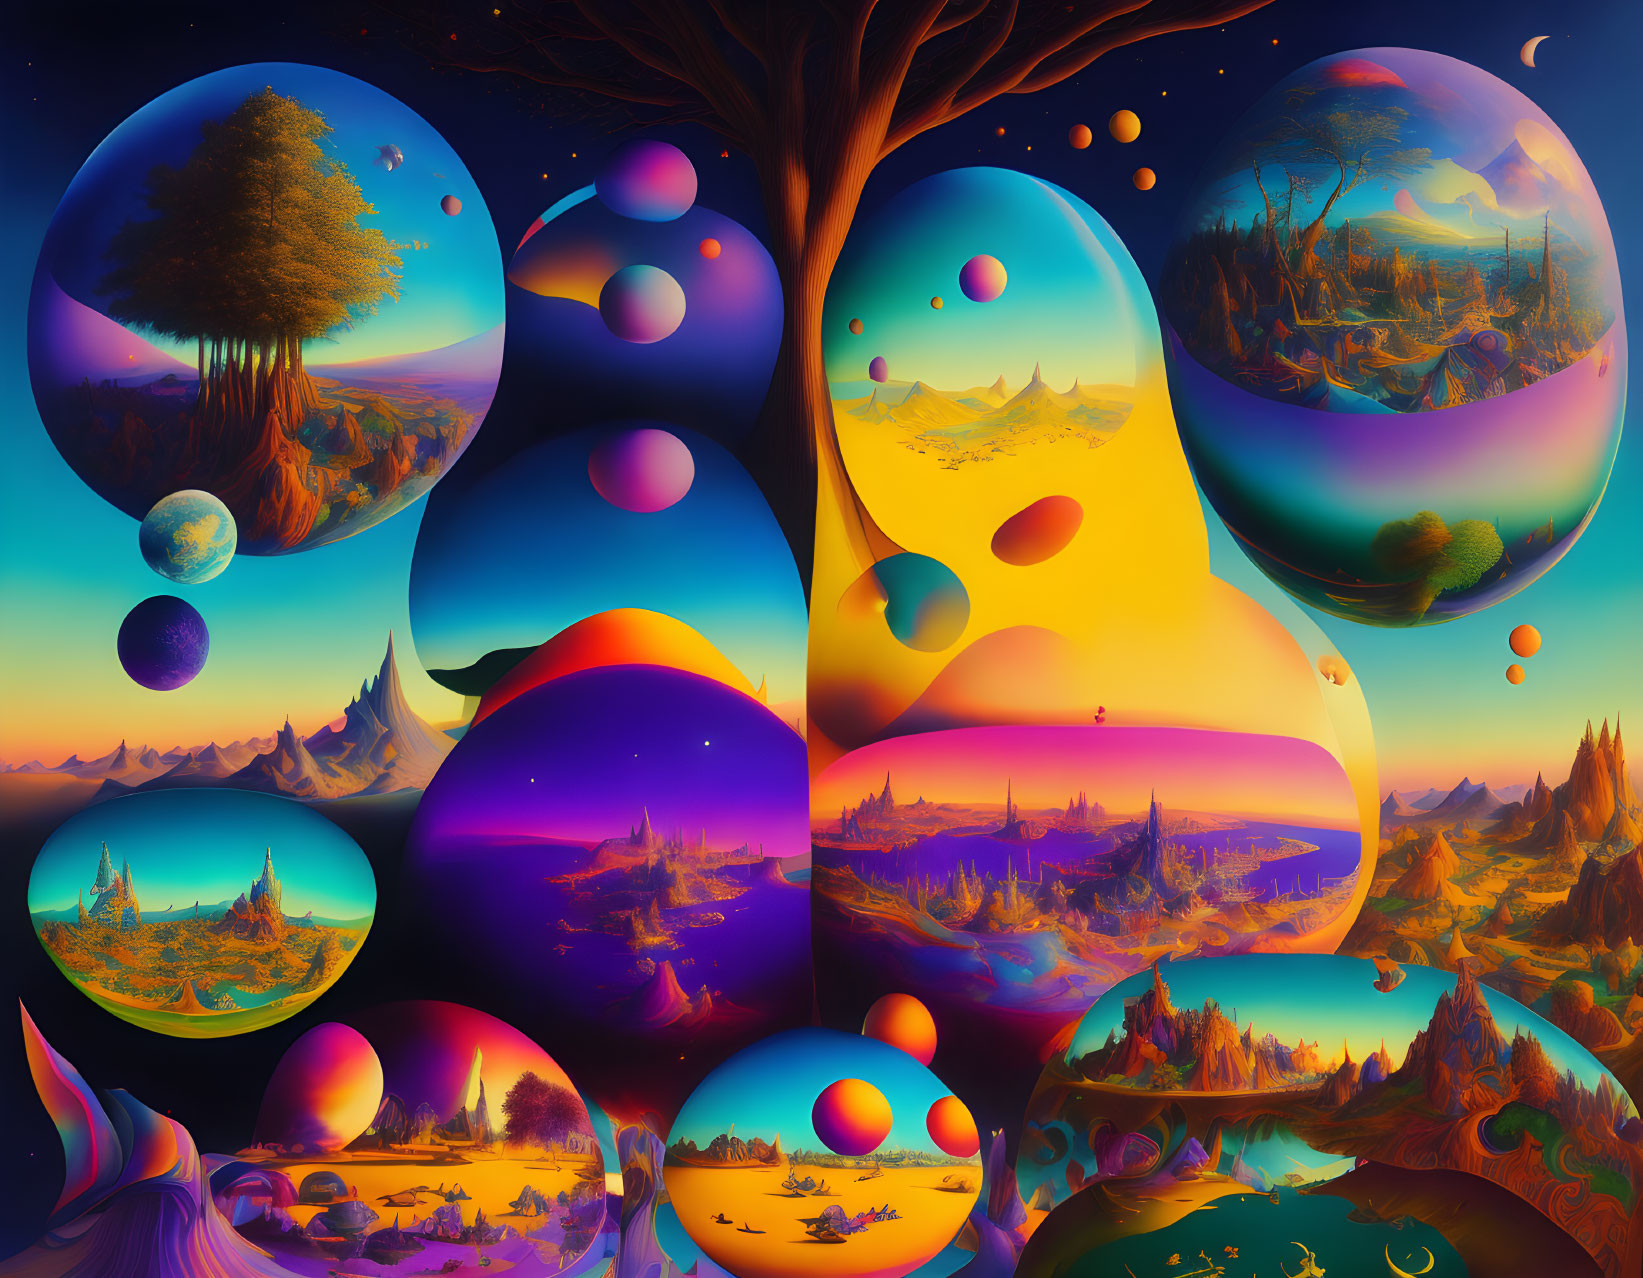 Colorful surreal landscape with floating orbs and fantastical scenes